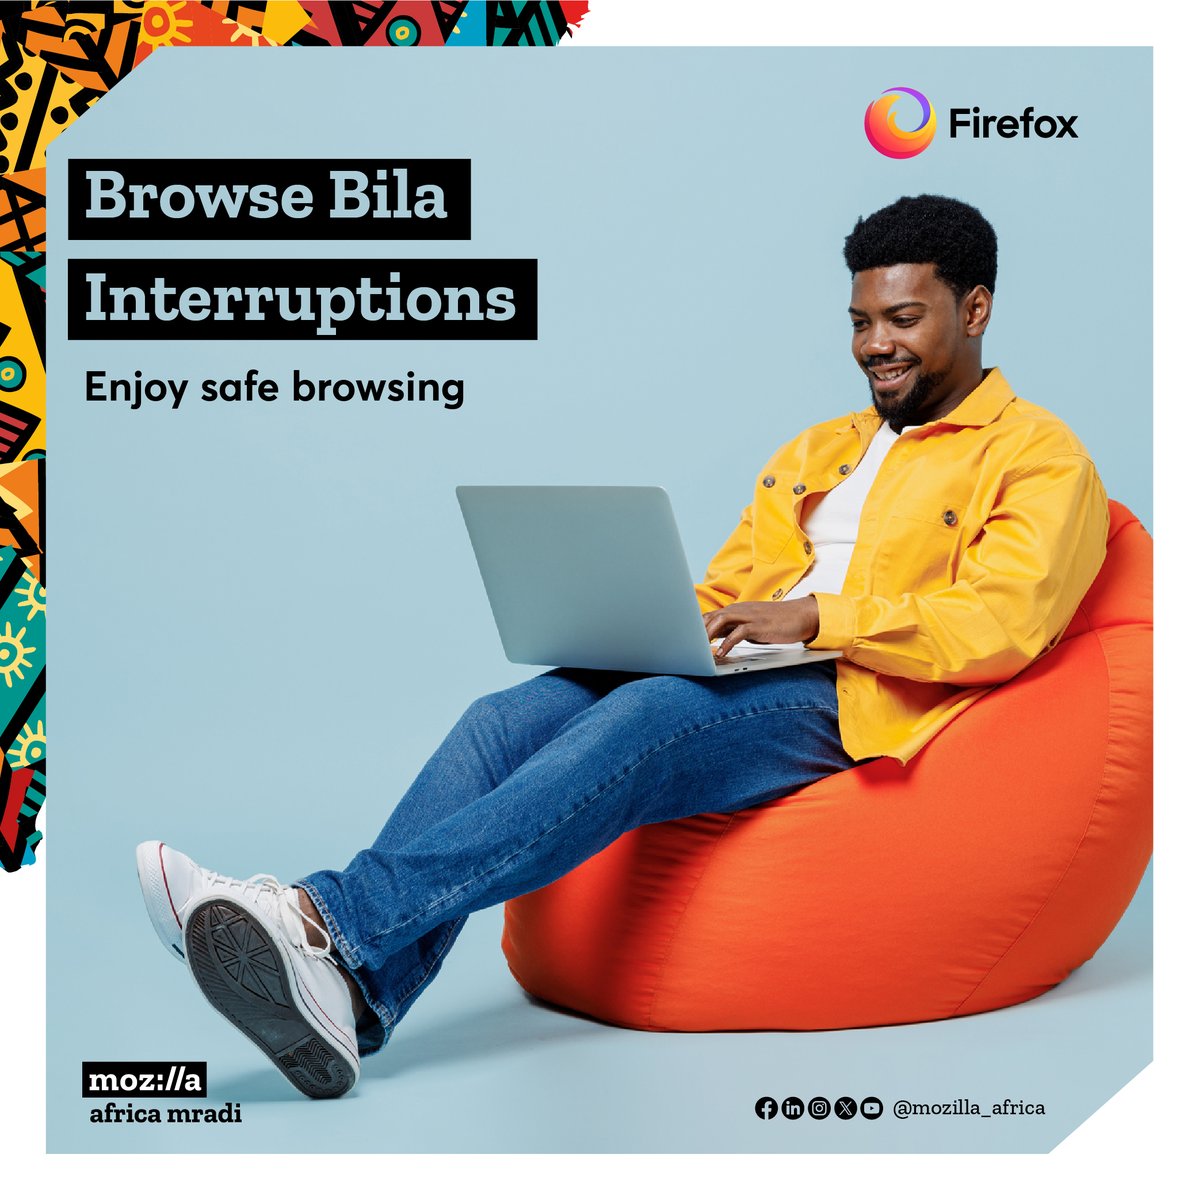 Tired of interruptions?

Discover exemplary built-in pop-up blocking features
and Focus on what matters.

Download Firefox na uenjoy browsing bila interruptions.

#MozillaAfricaMradi #Firefox #OnlineSafety